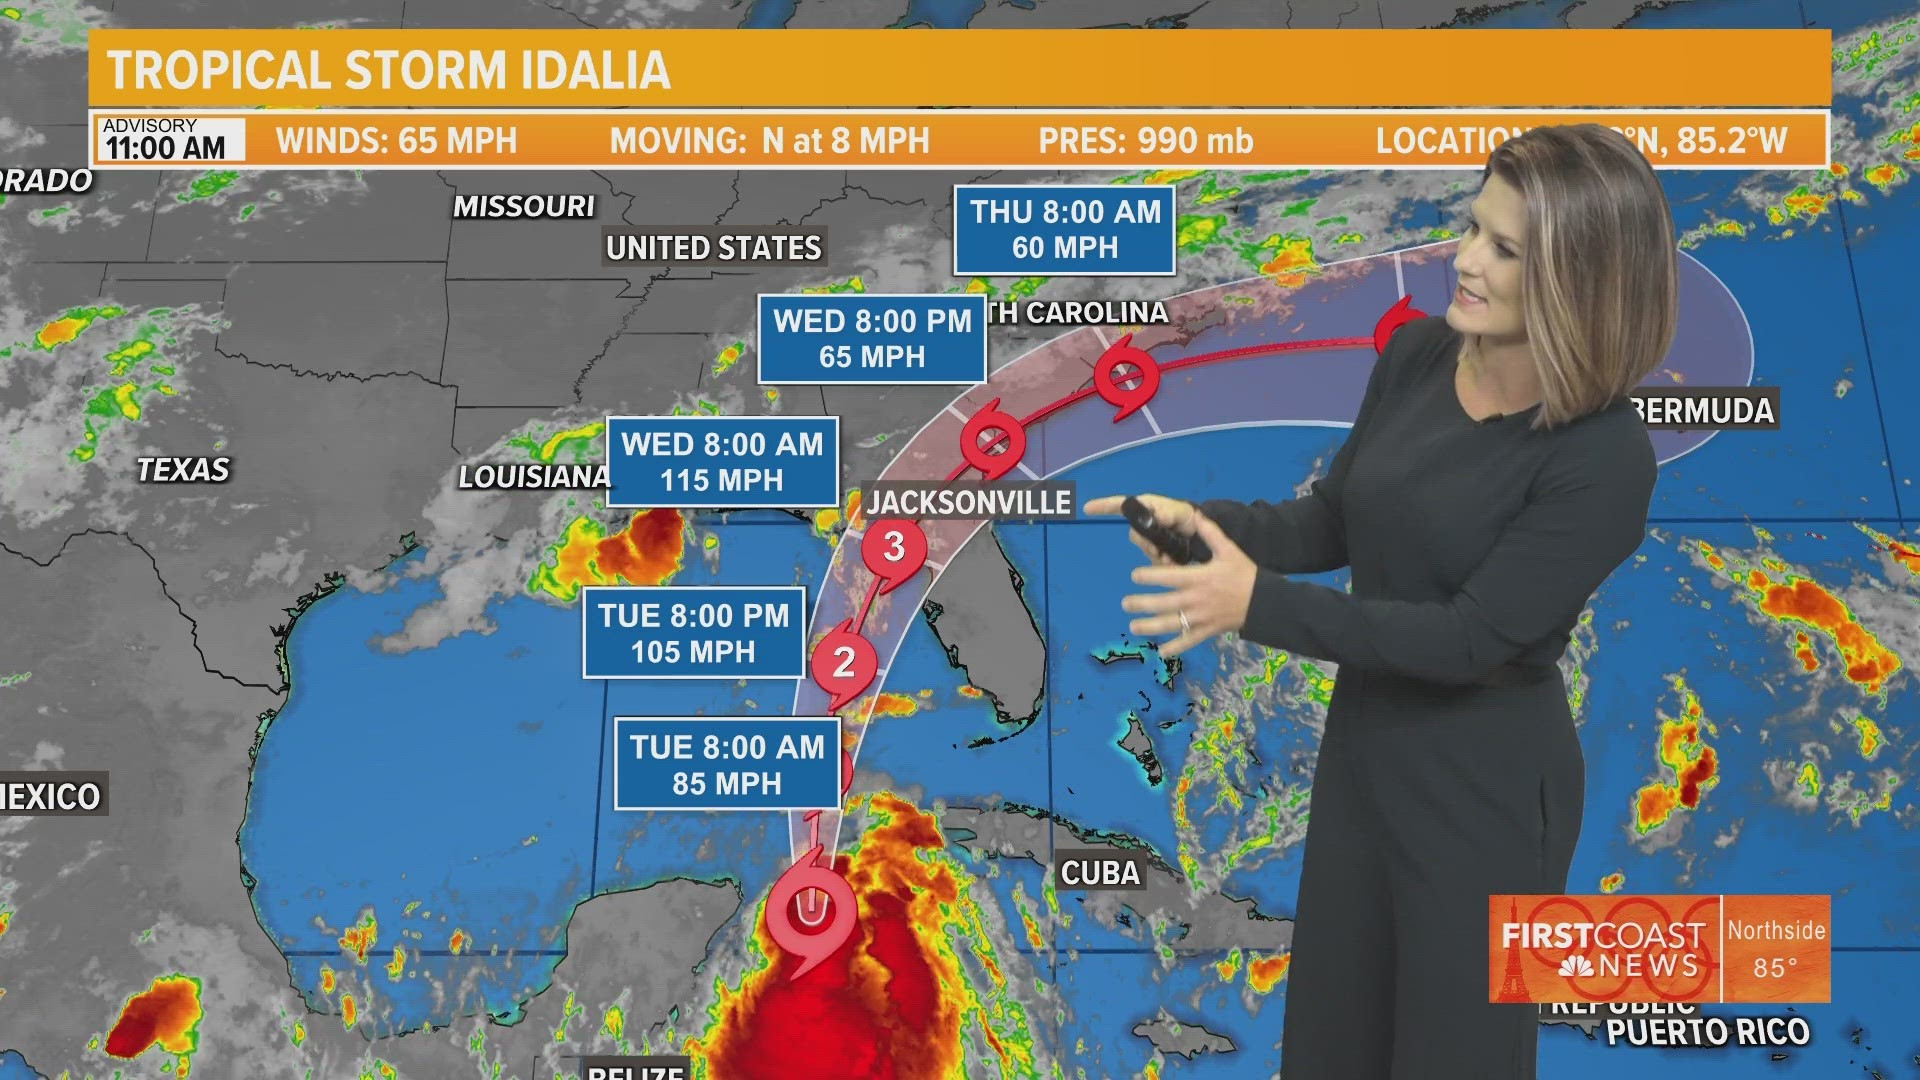 We're tracking the most recent updates to determine where and when Tropical Storm Idalia will make landfall.